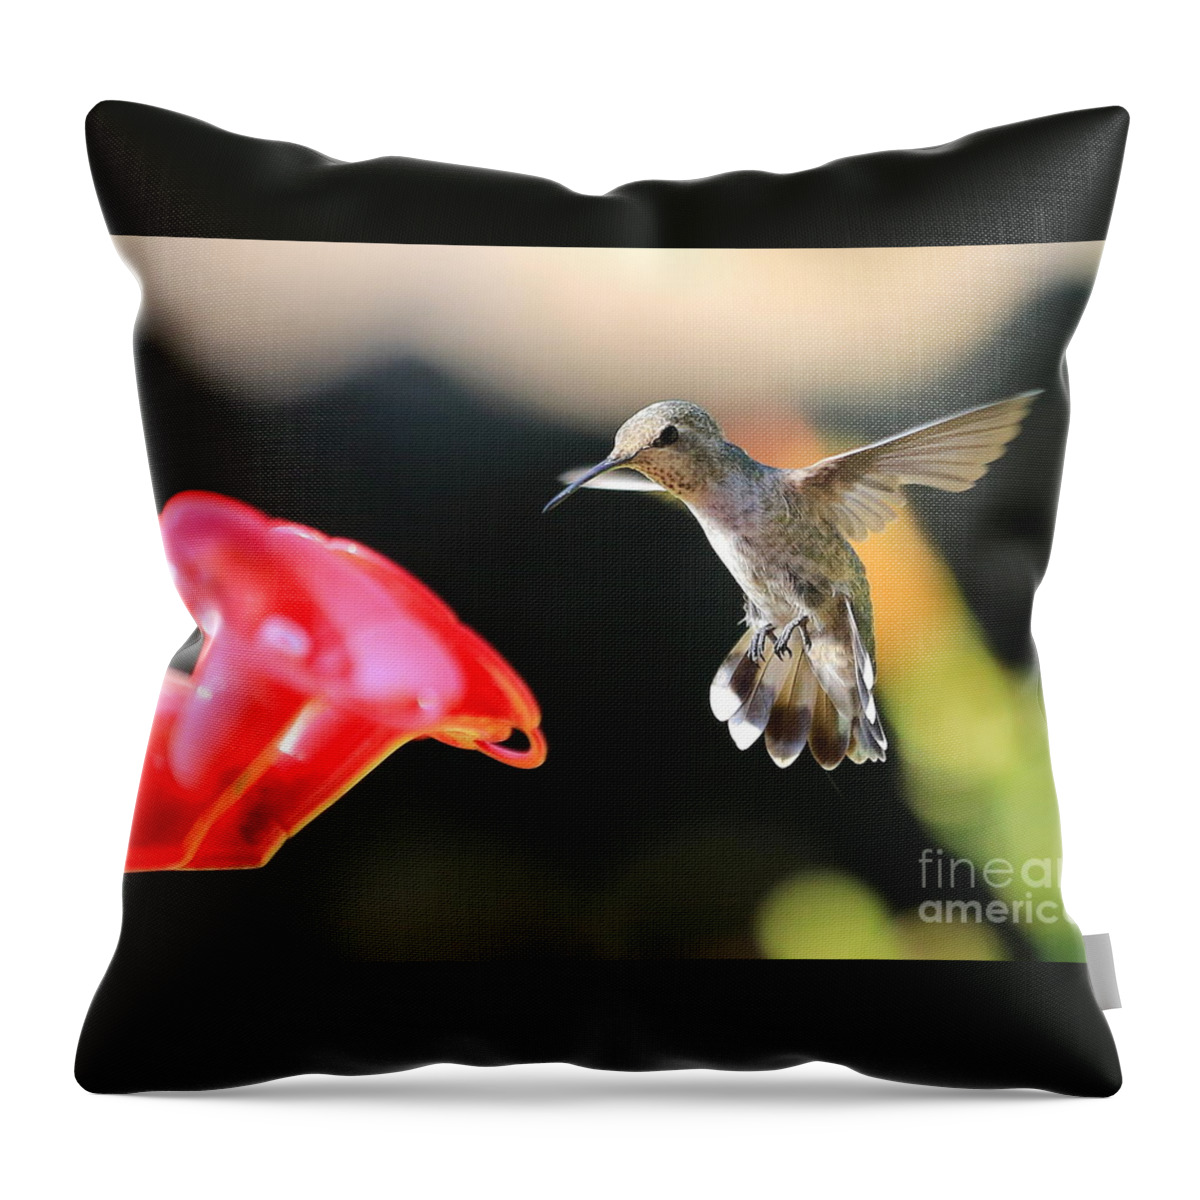 Happy Throw Pillow featuring the photograph Happy Hummingbird by Carol Groenen